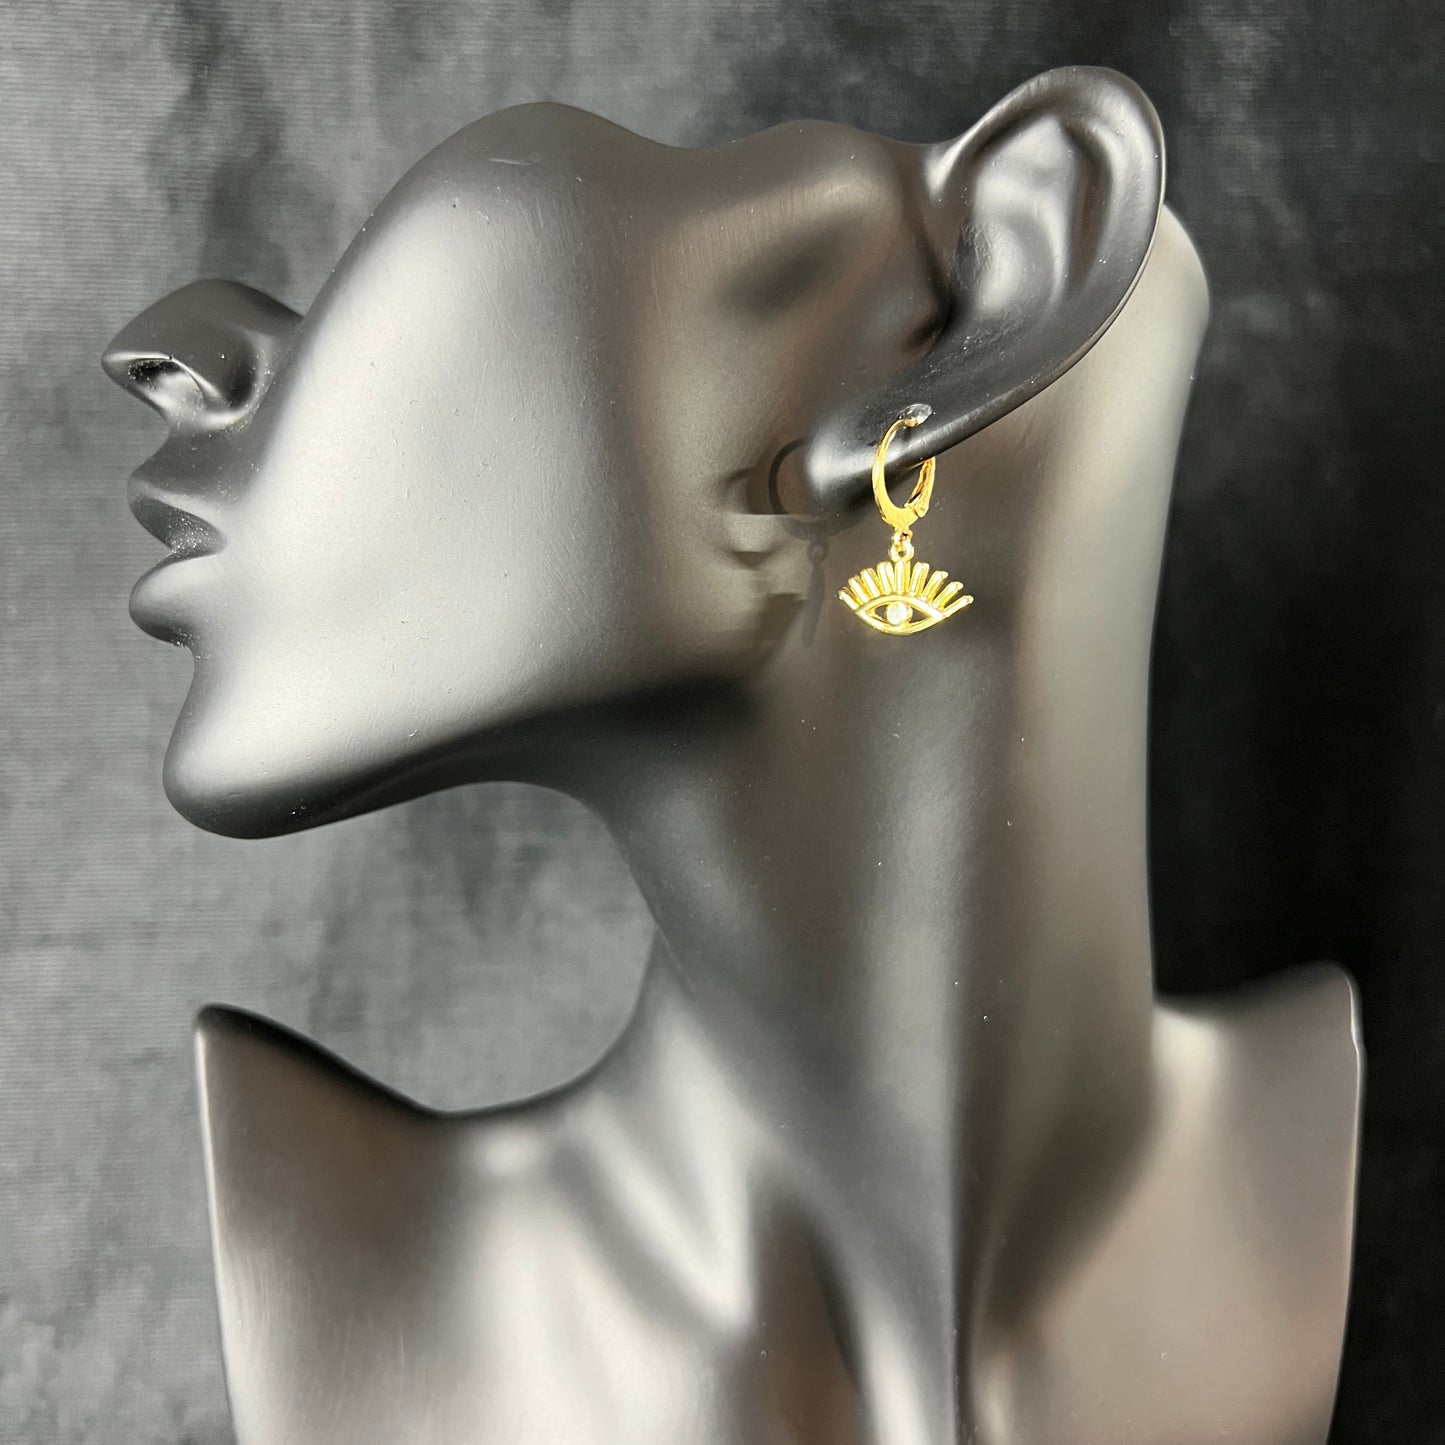 Third eye earrings gold-tone occult and elegant jewelry dainty earrings with stainless steel closures